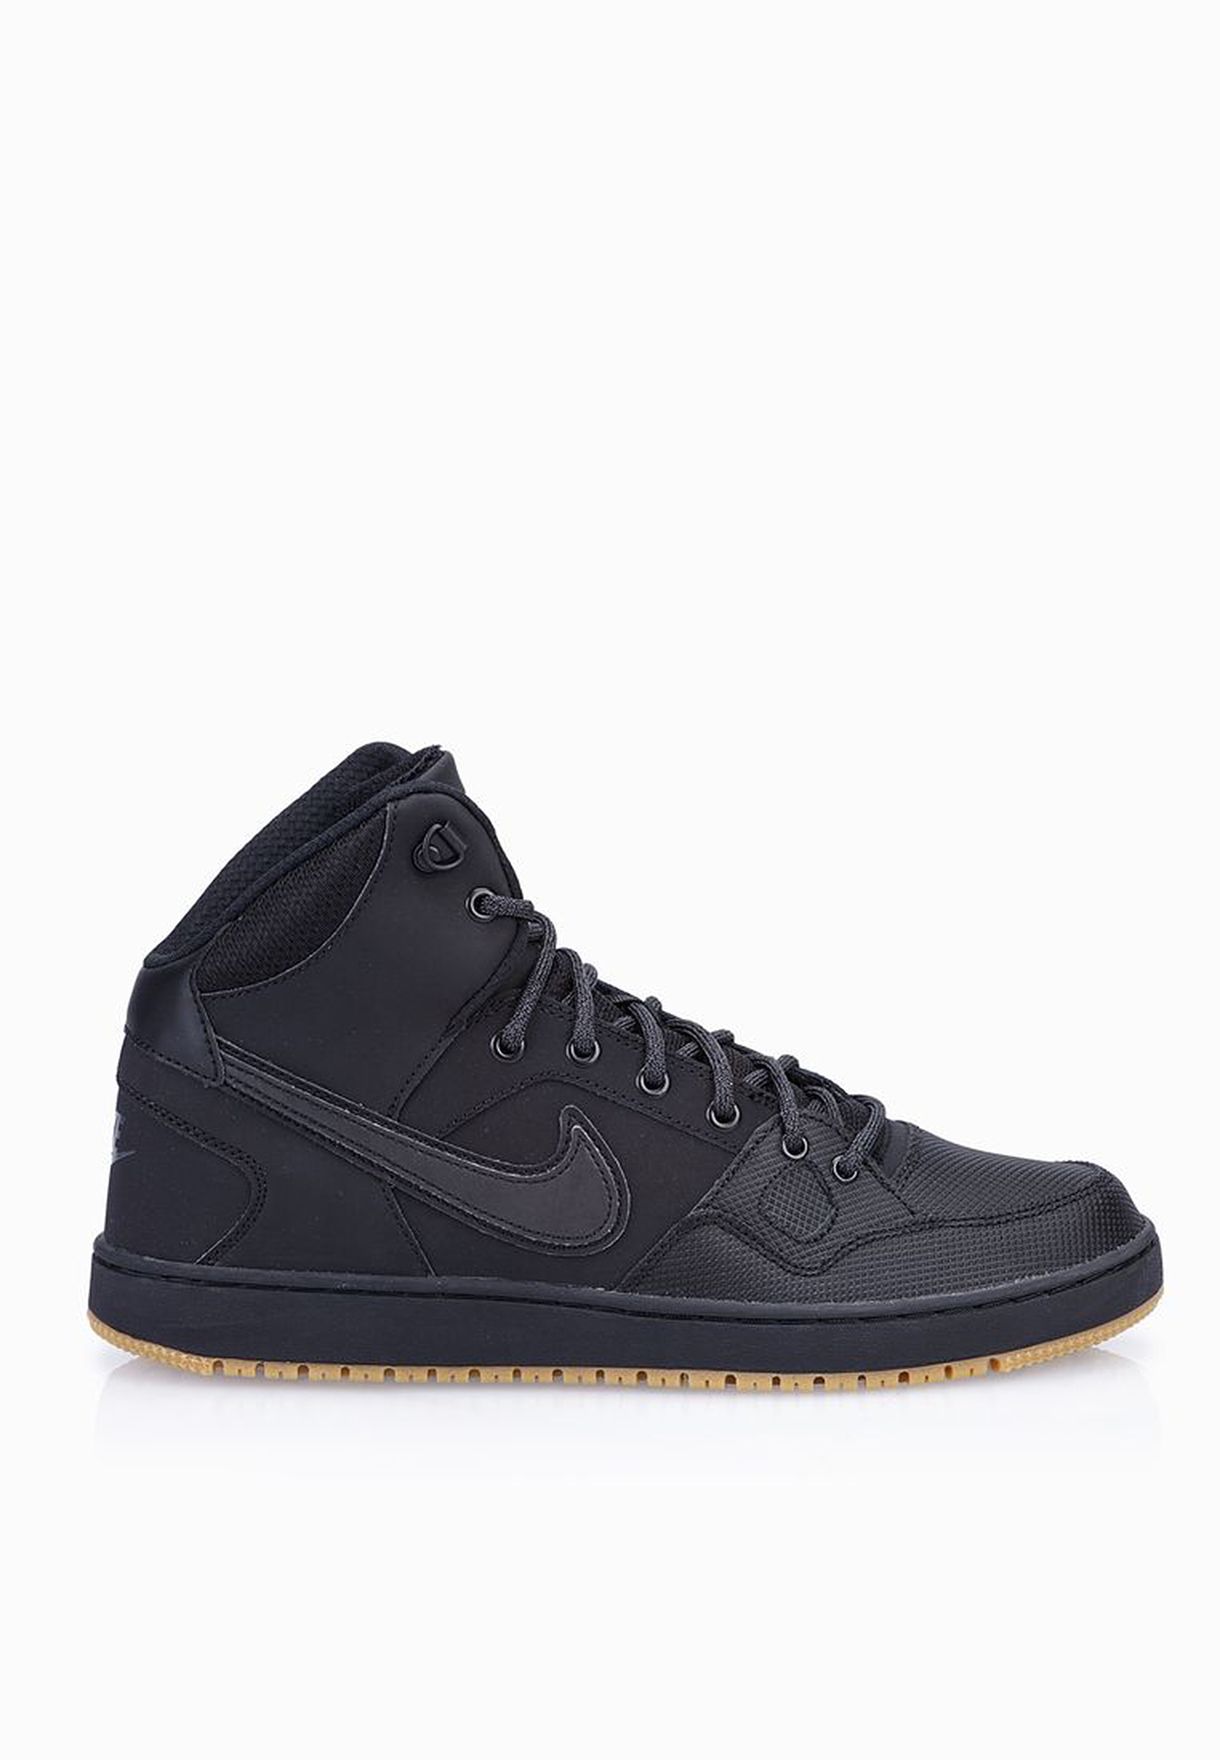 nike son of force winter